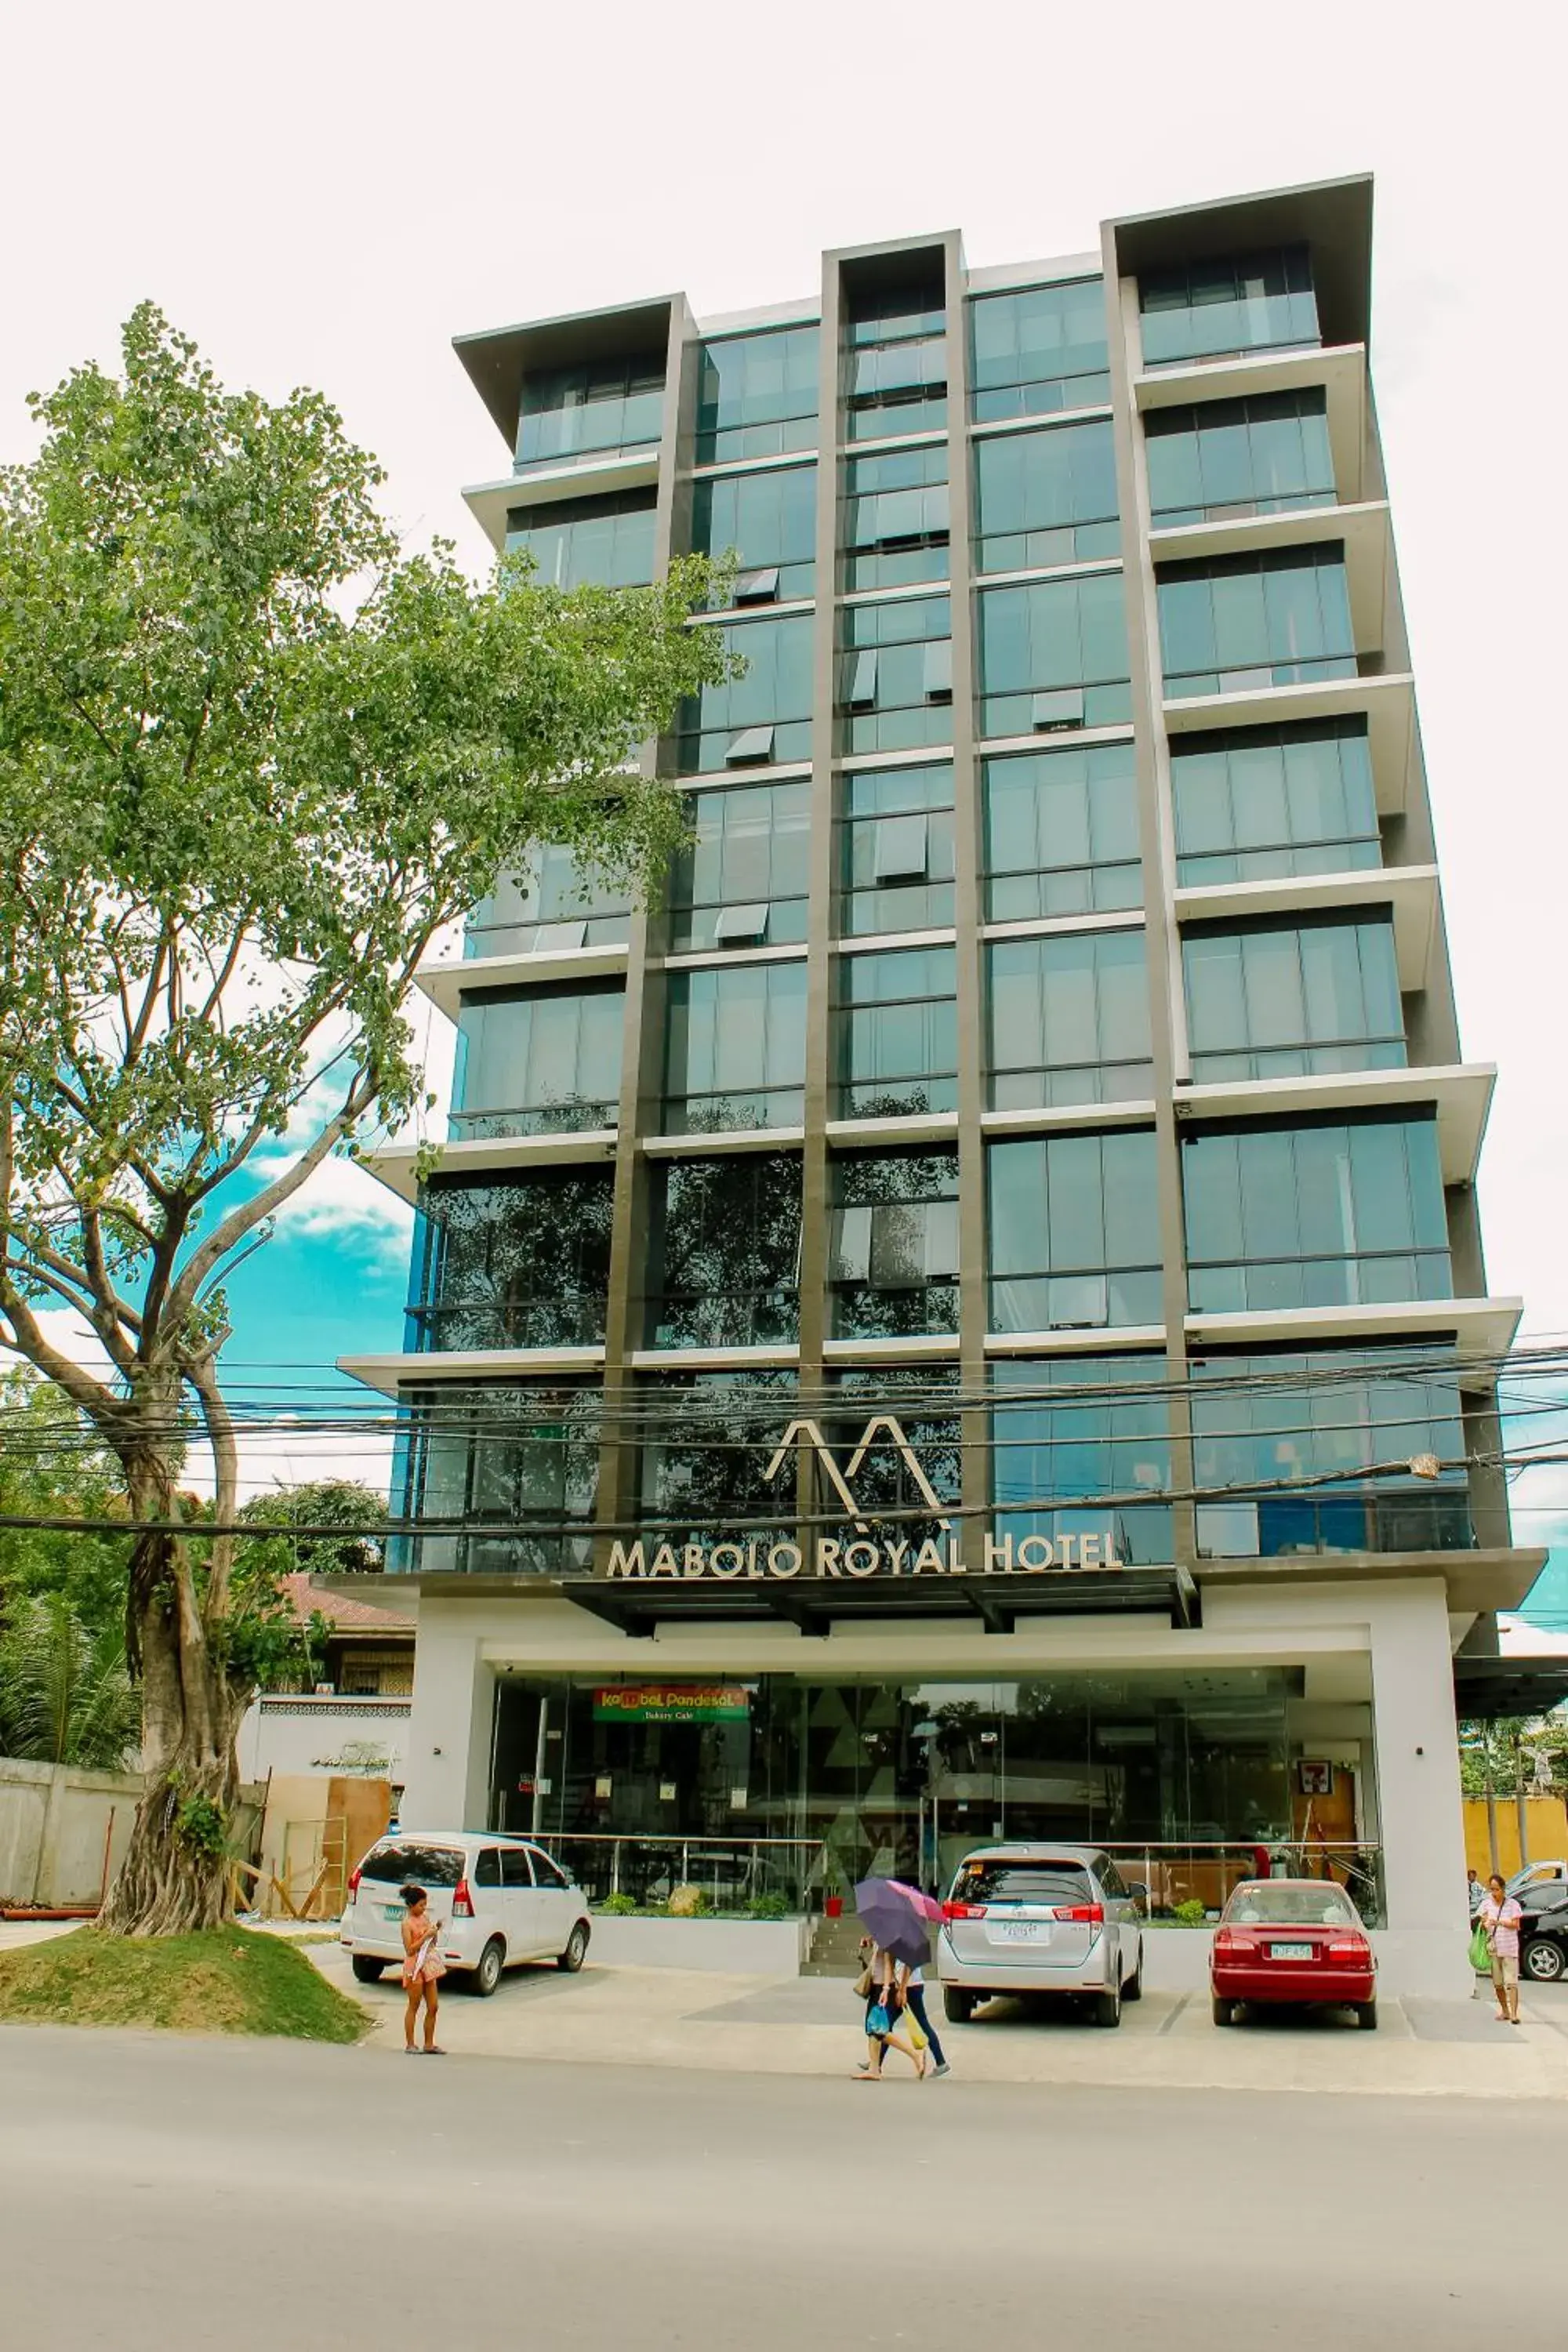 Property building in Mabolo Royal Hotel